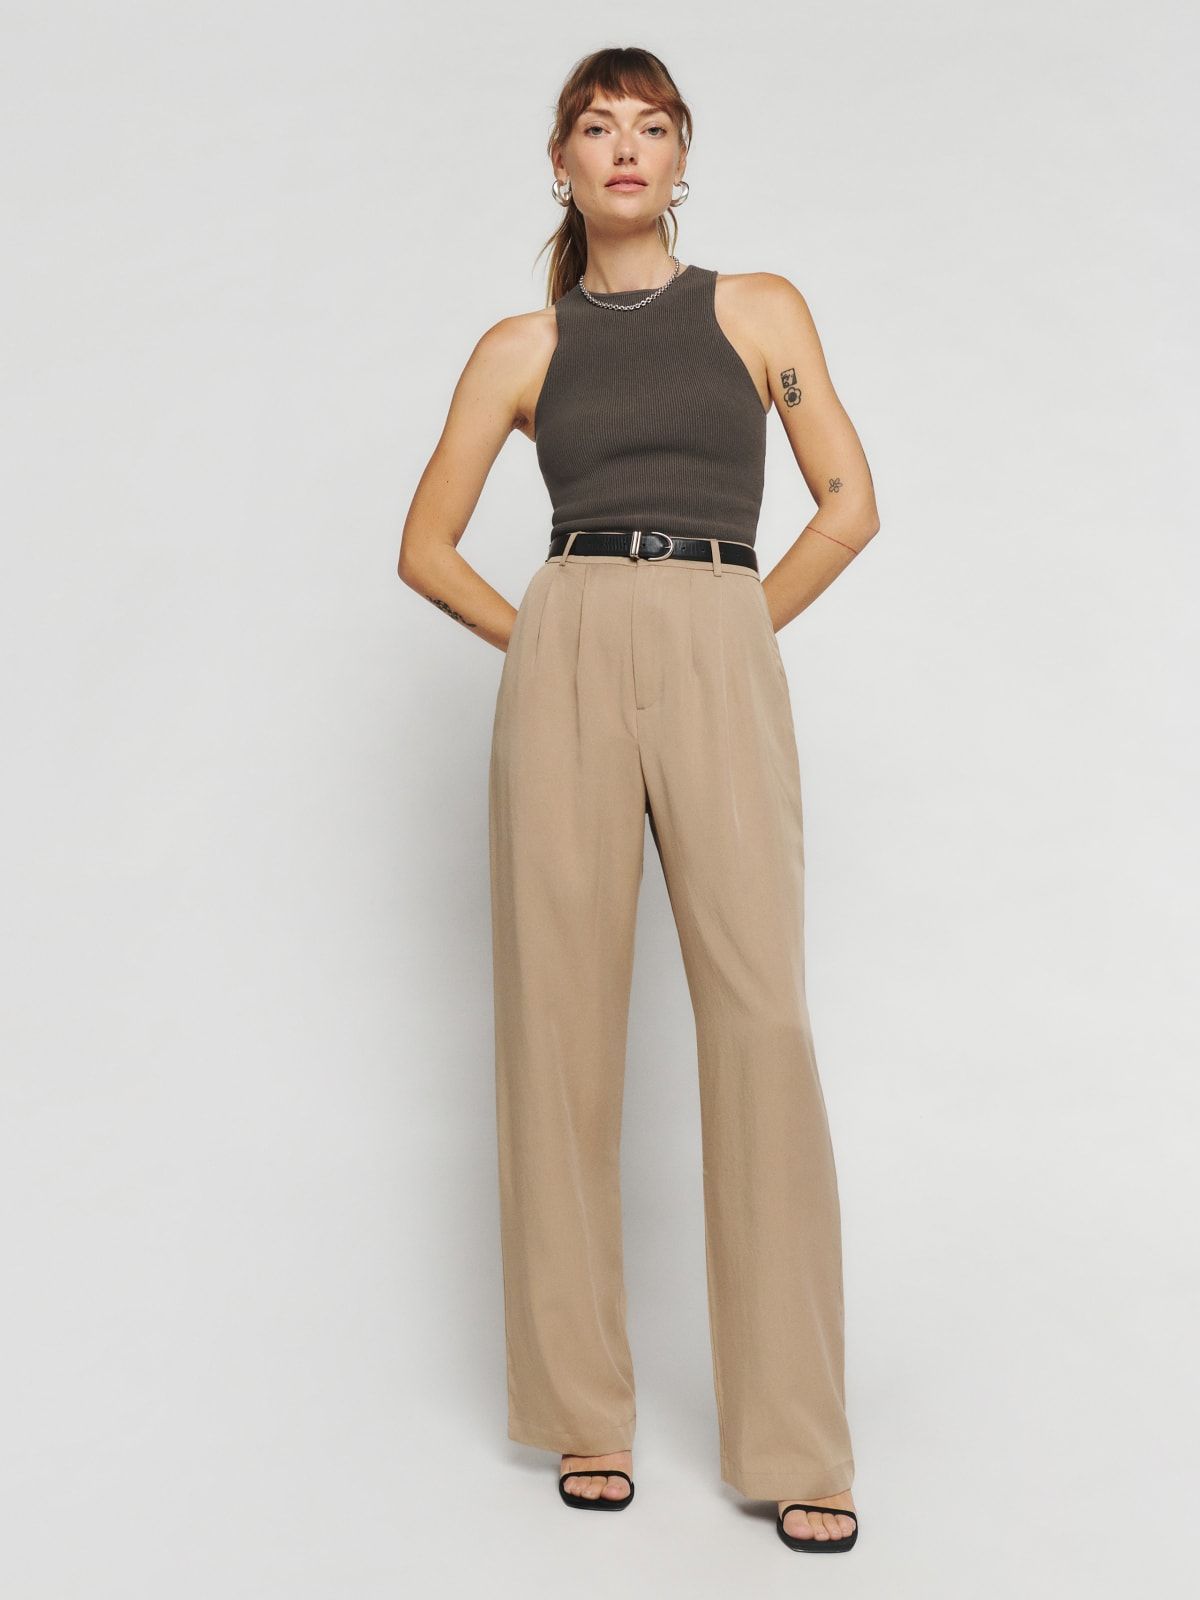 SELONE High Waisted Wide Leg Pants for Women Plus Size High Waist High Rise  Wide Leg Trendy Casual with Belted Long Pant Solid Color High-waist Loose  Pants for Everyday Wear Running Work